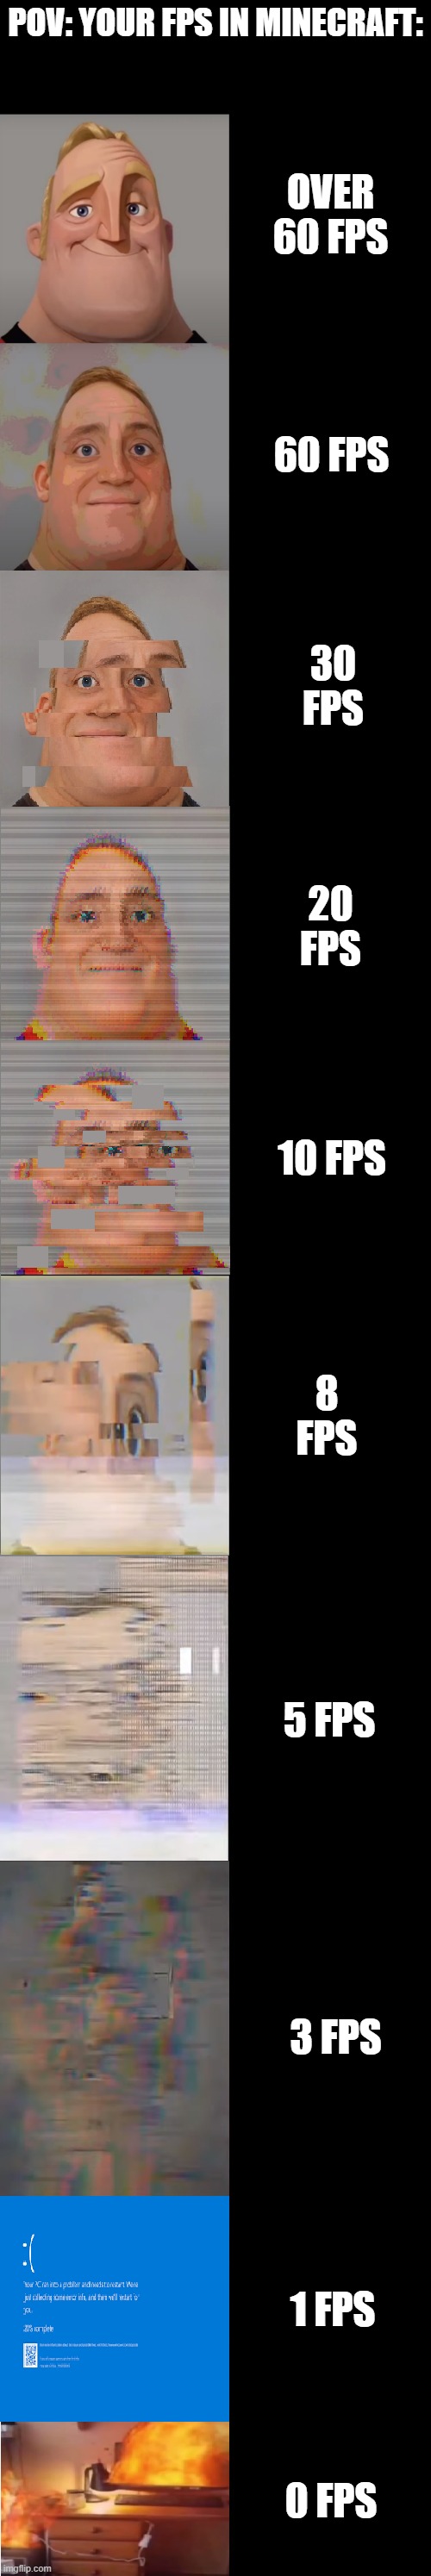 mr incredible becoming glitched POV: your FPS in minecraft | POV: YOUR FPS IN MINECRAFT:; OVER 60 FPS; 60 FPS; 30 FPS; 20 FPS; 10 FPS; 8 FPS; 5 FPS; 3 FPS; 1 FPS; 0 FPS | image tagged in mr incredible becoming glitched template | made w/ Imgflip meme maker